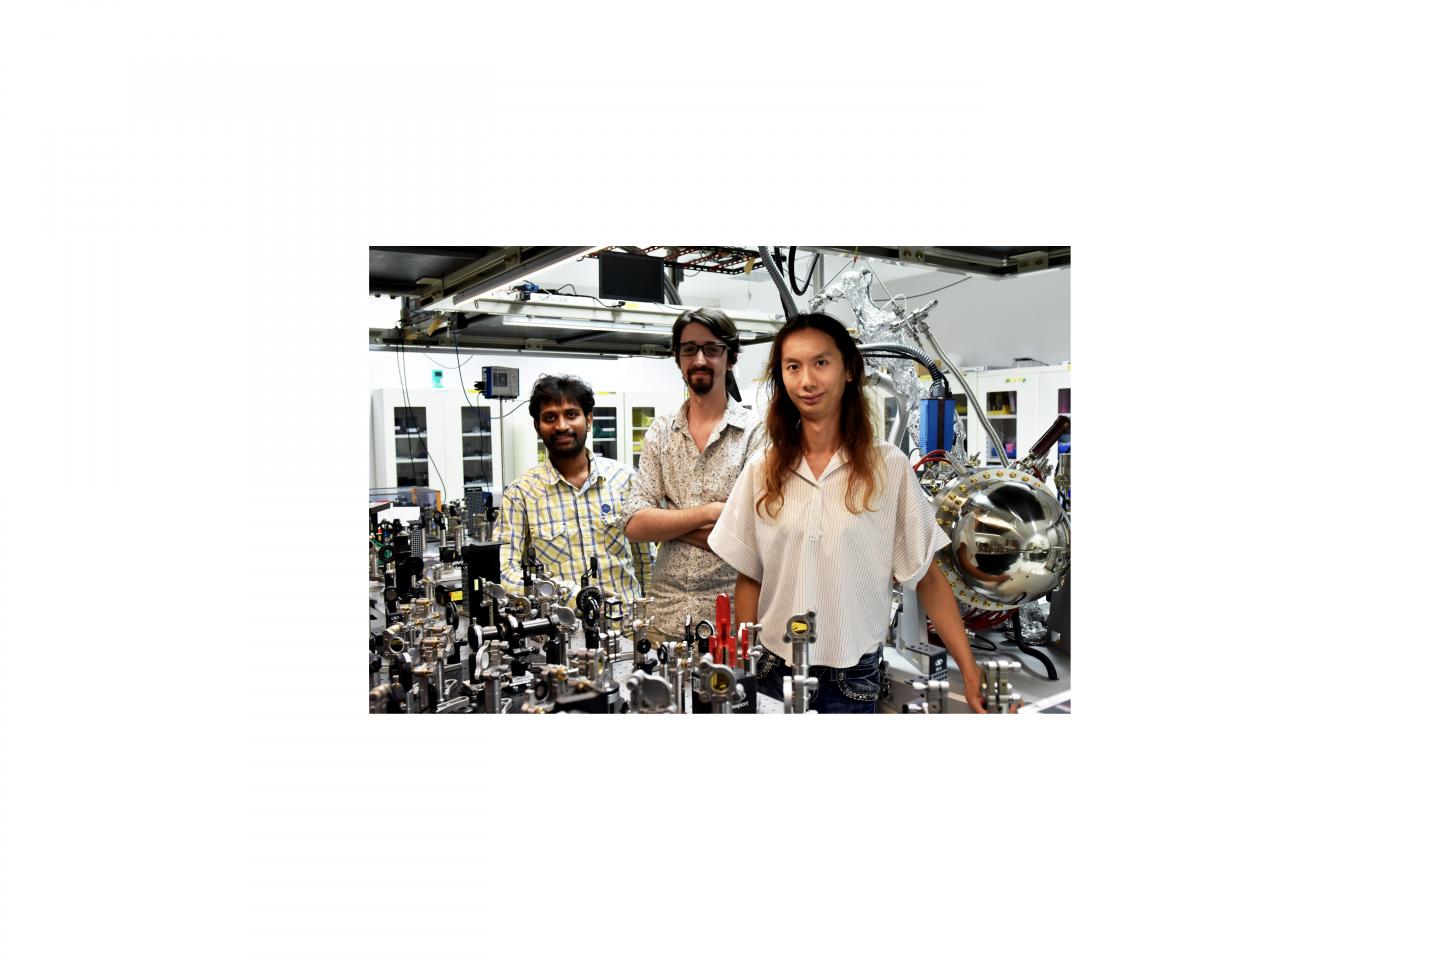 Researchers from the Femtosecond Spectroscopy Unit